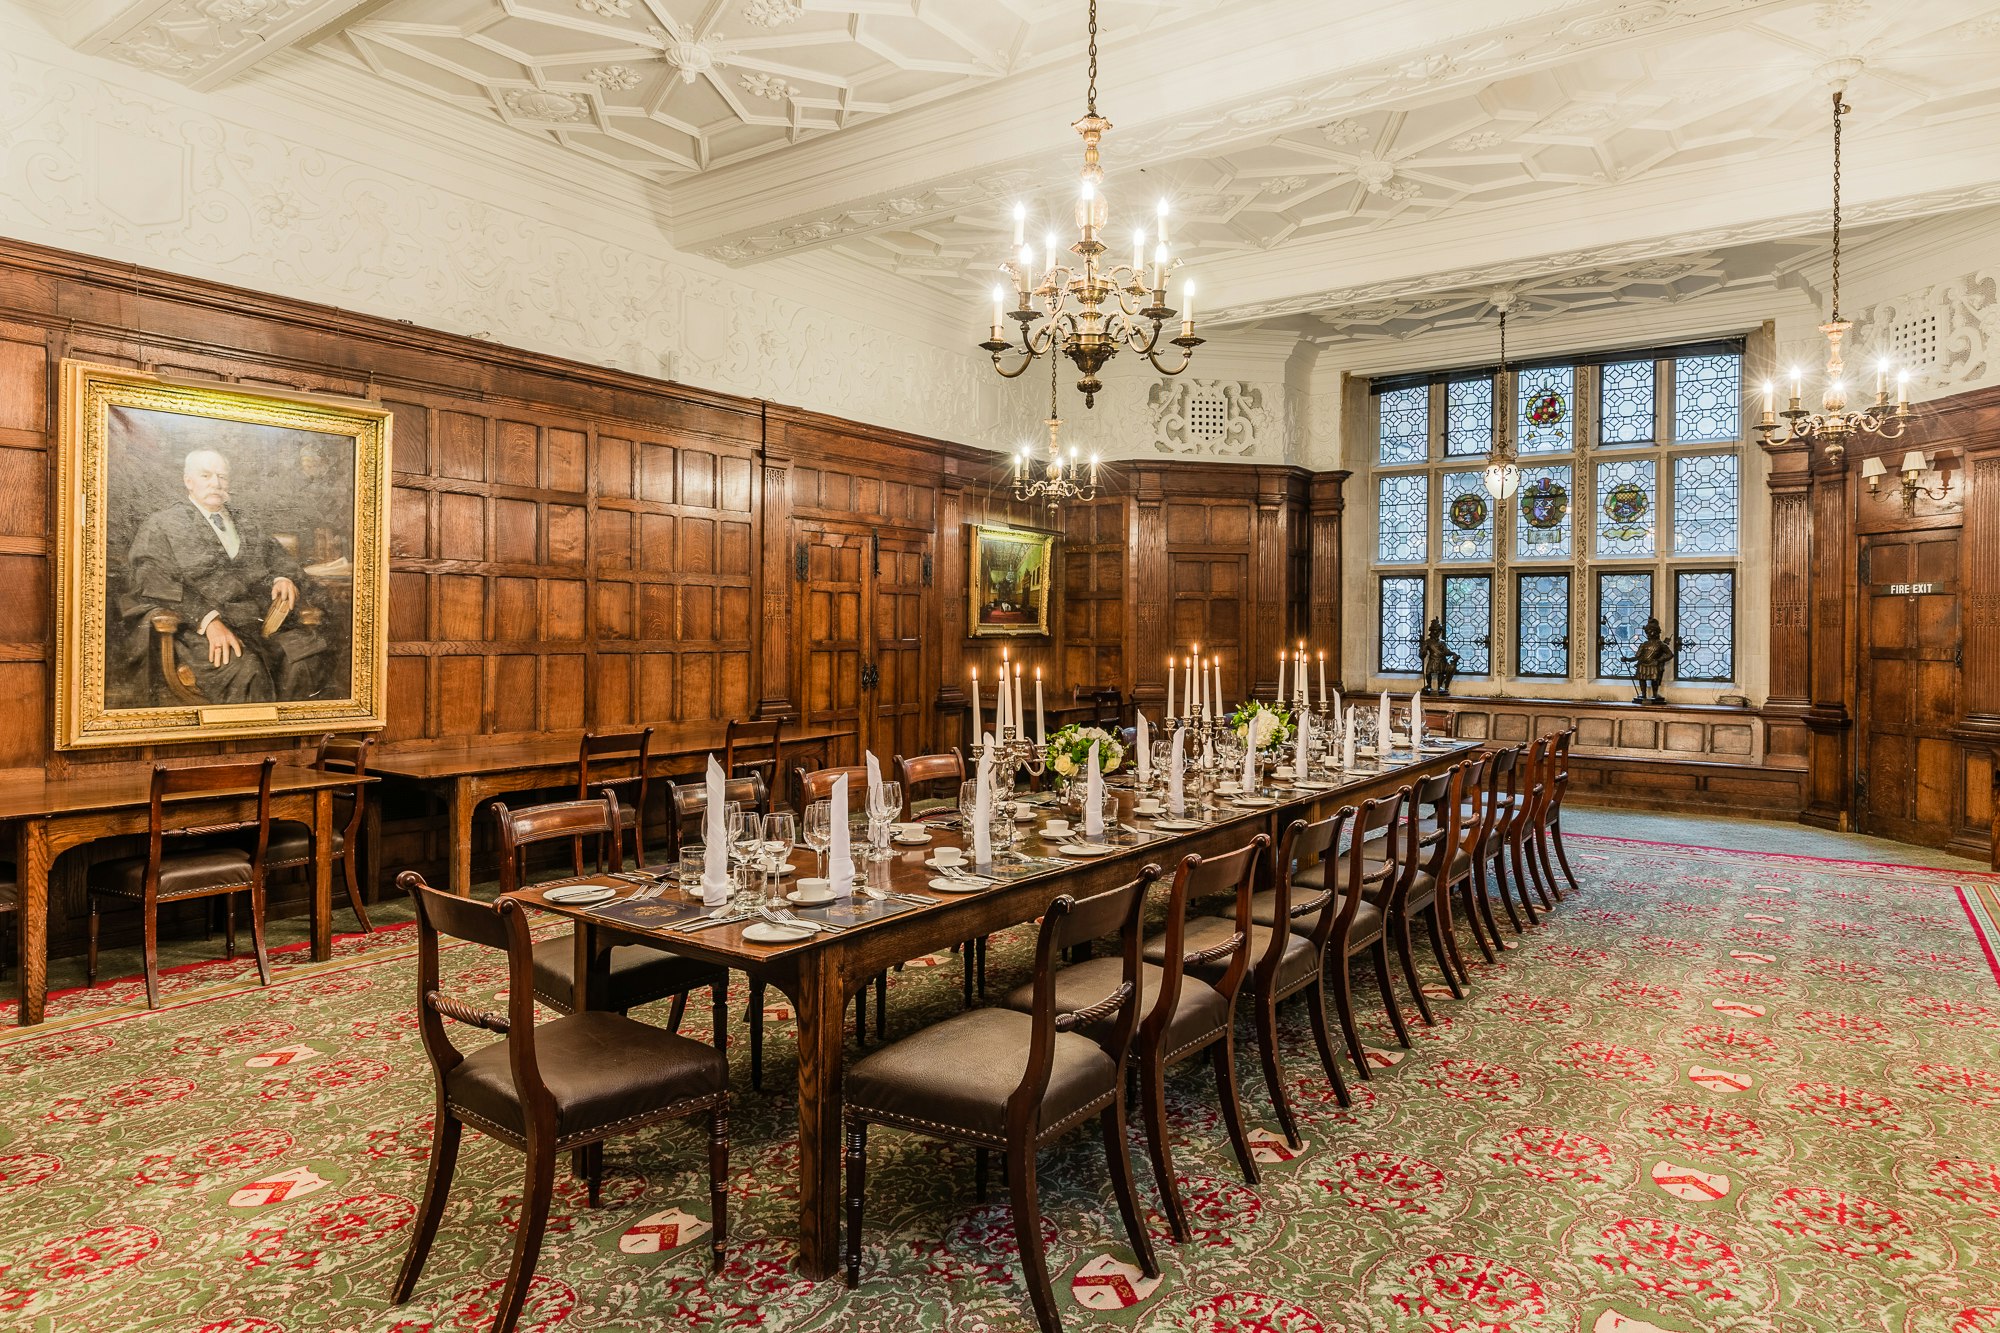 Ironmongers' Hall - The Court Room and The Luncheon Room image 4